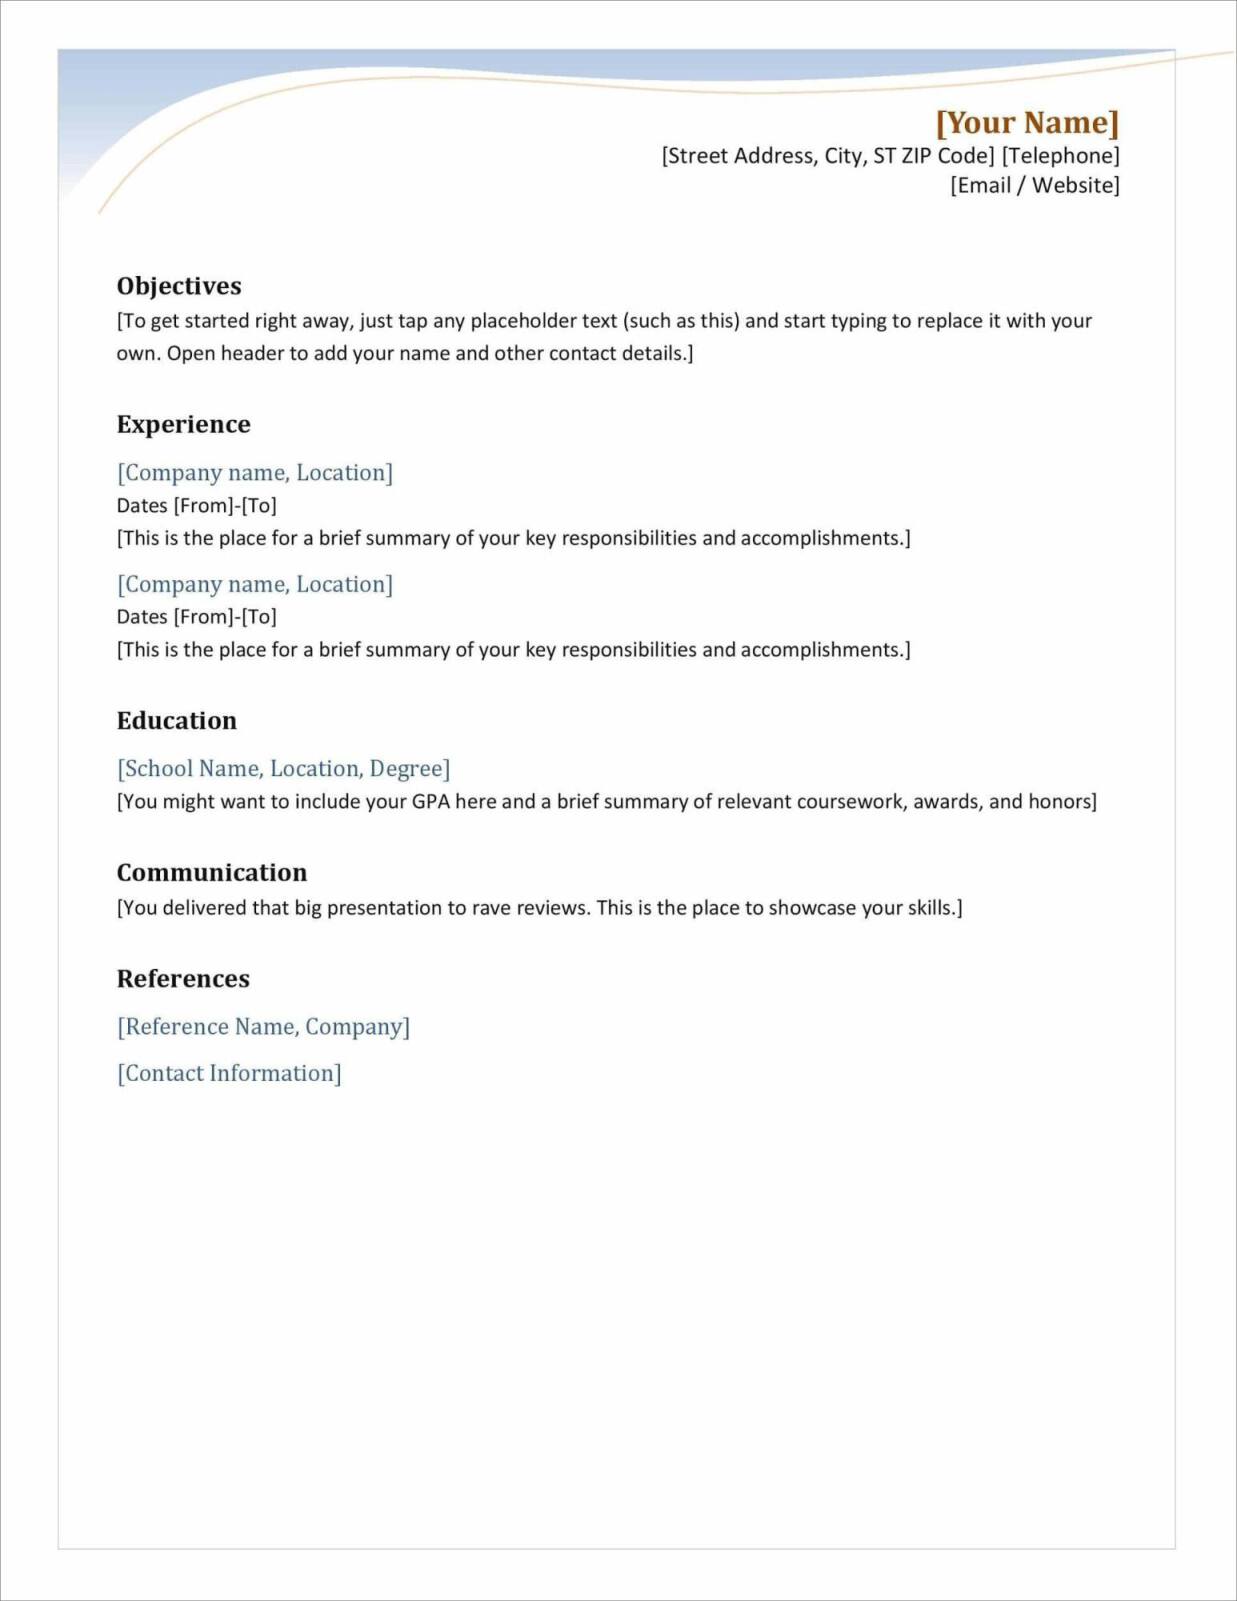 Resume Format For Experienced Candidates from cdn-images.zety.com